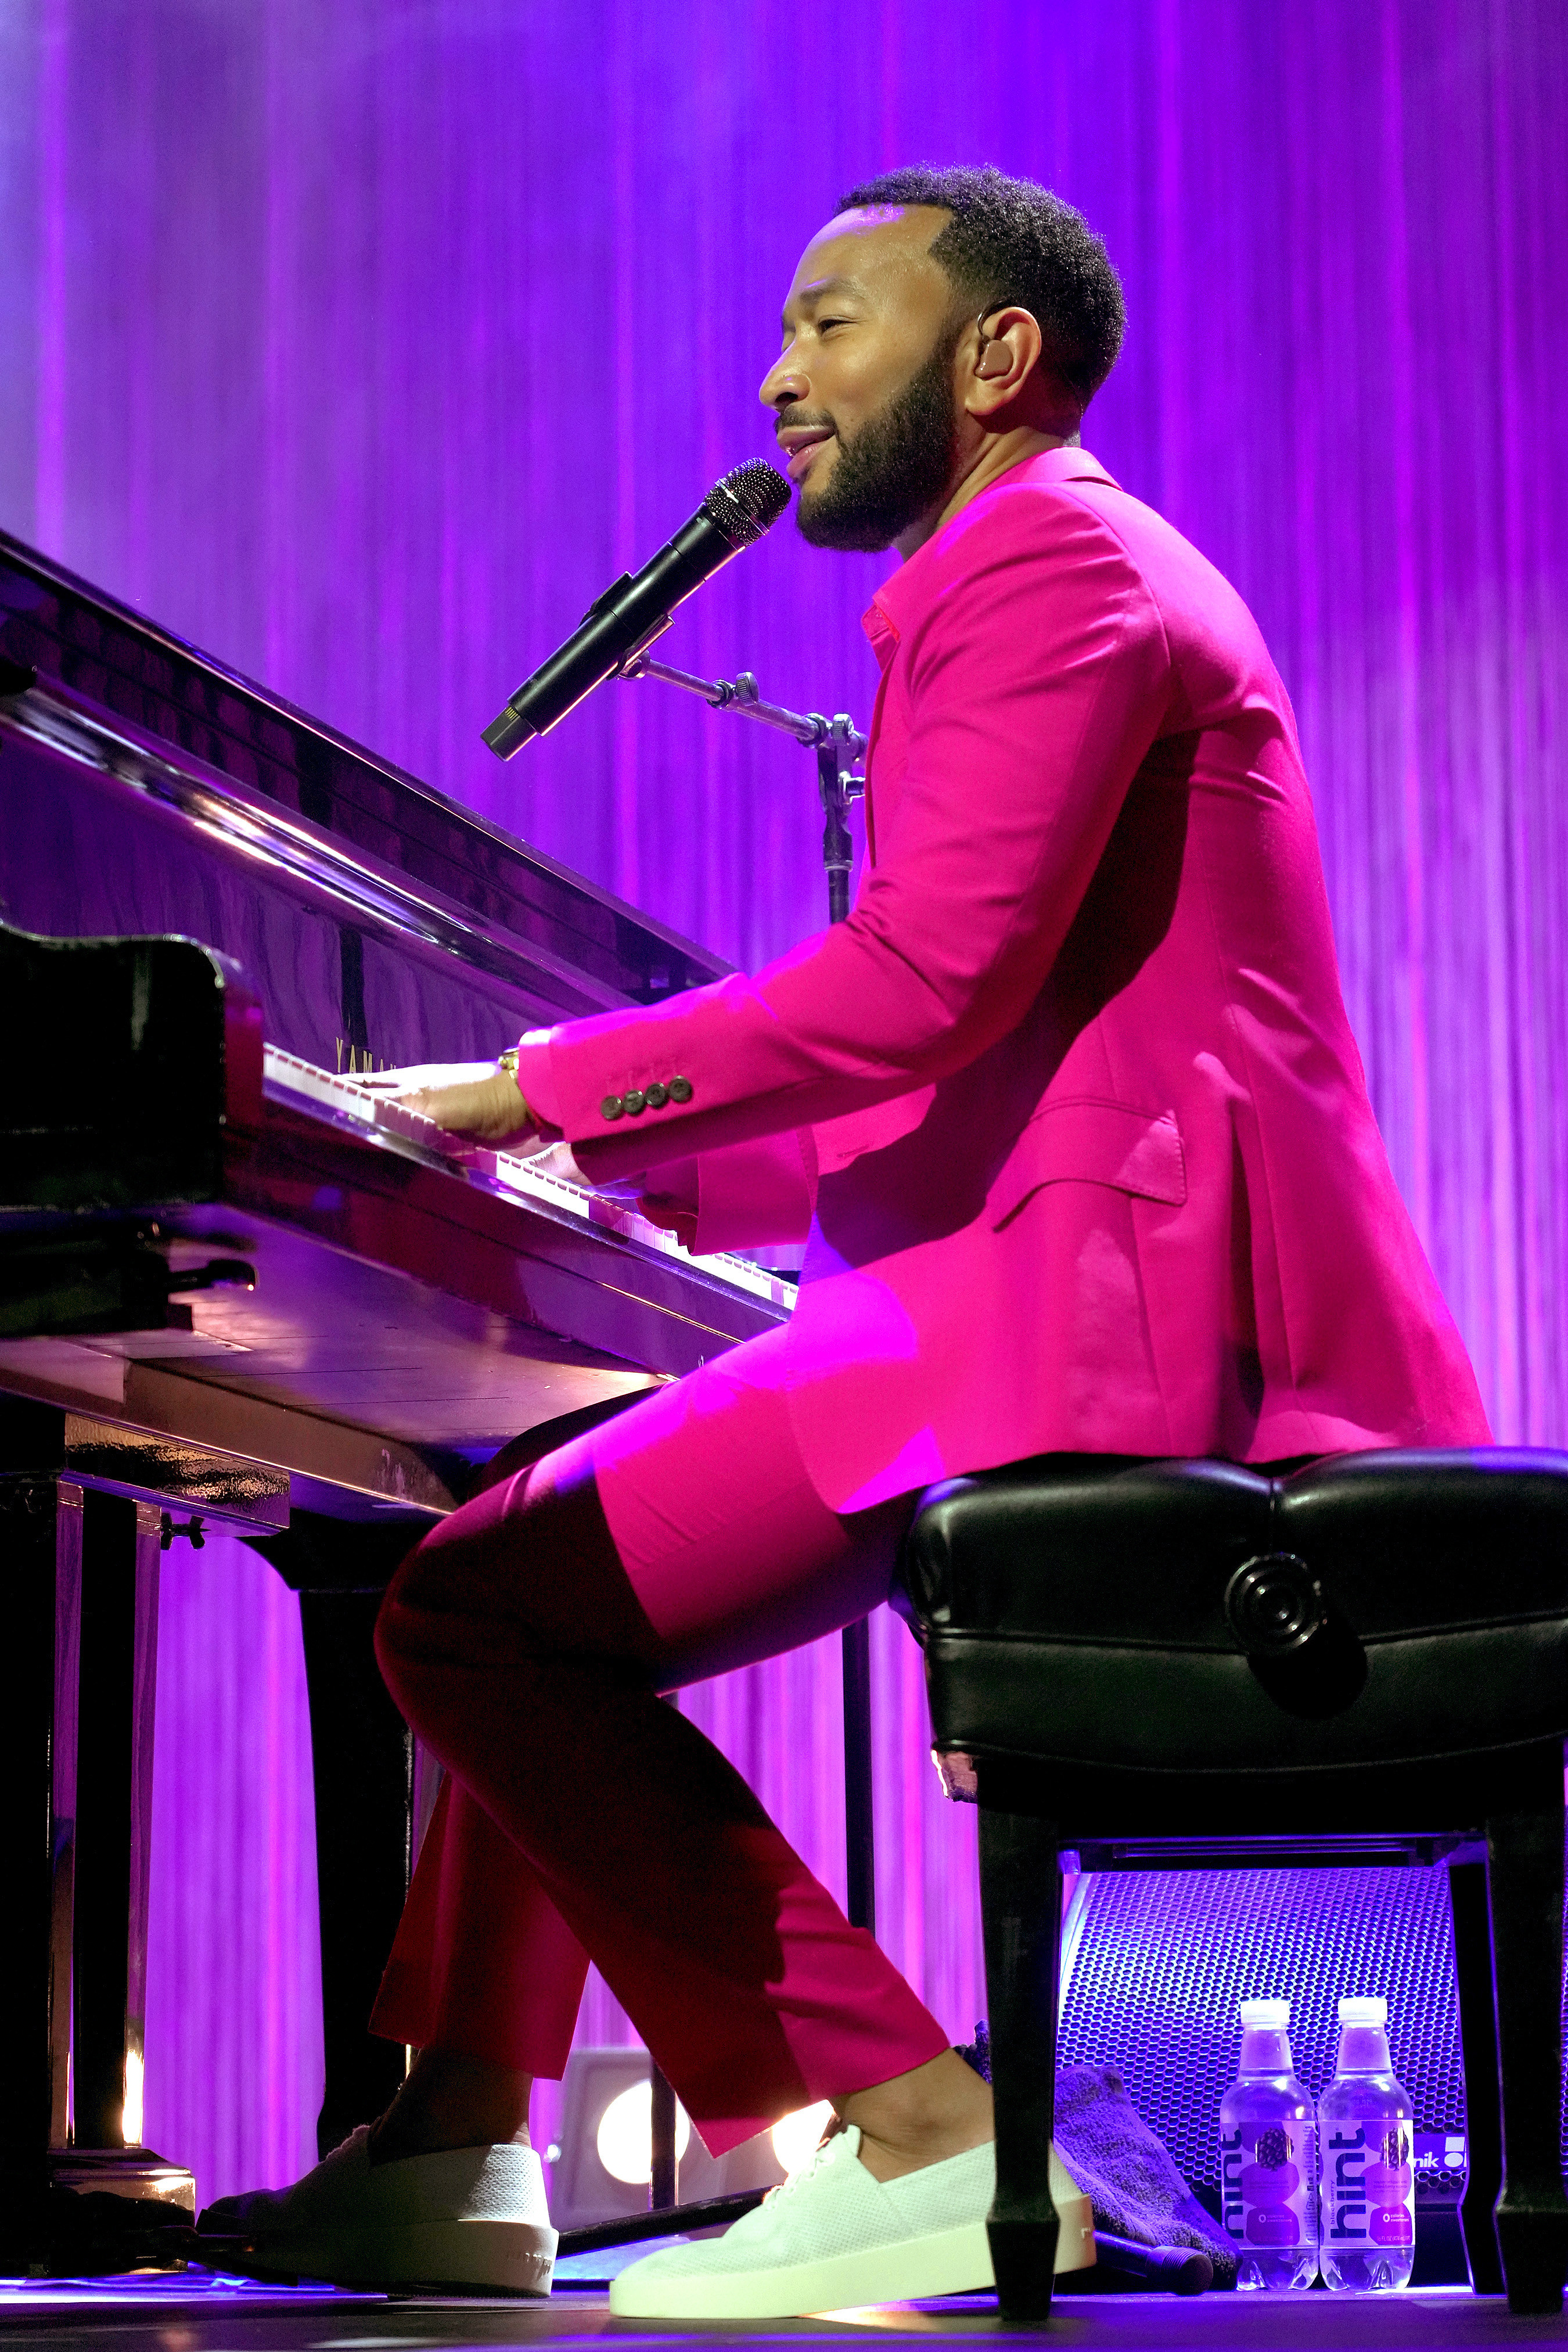 John Legend sings onstage while playing the piano